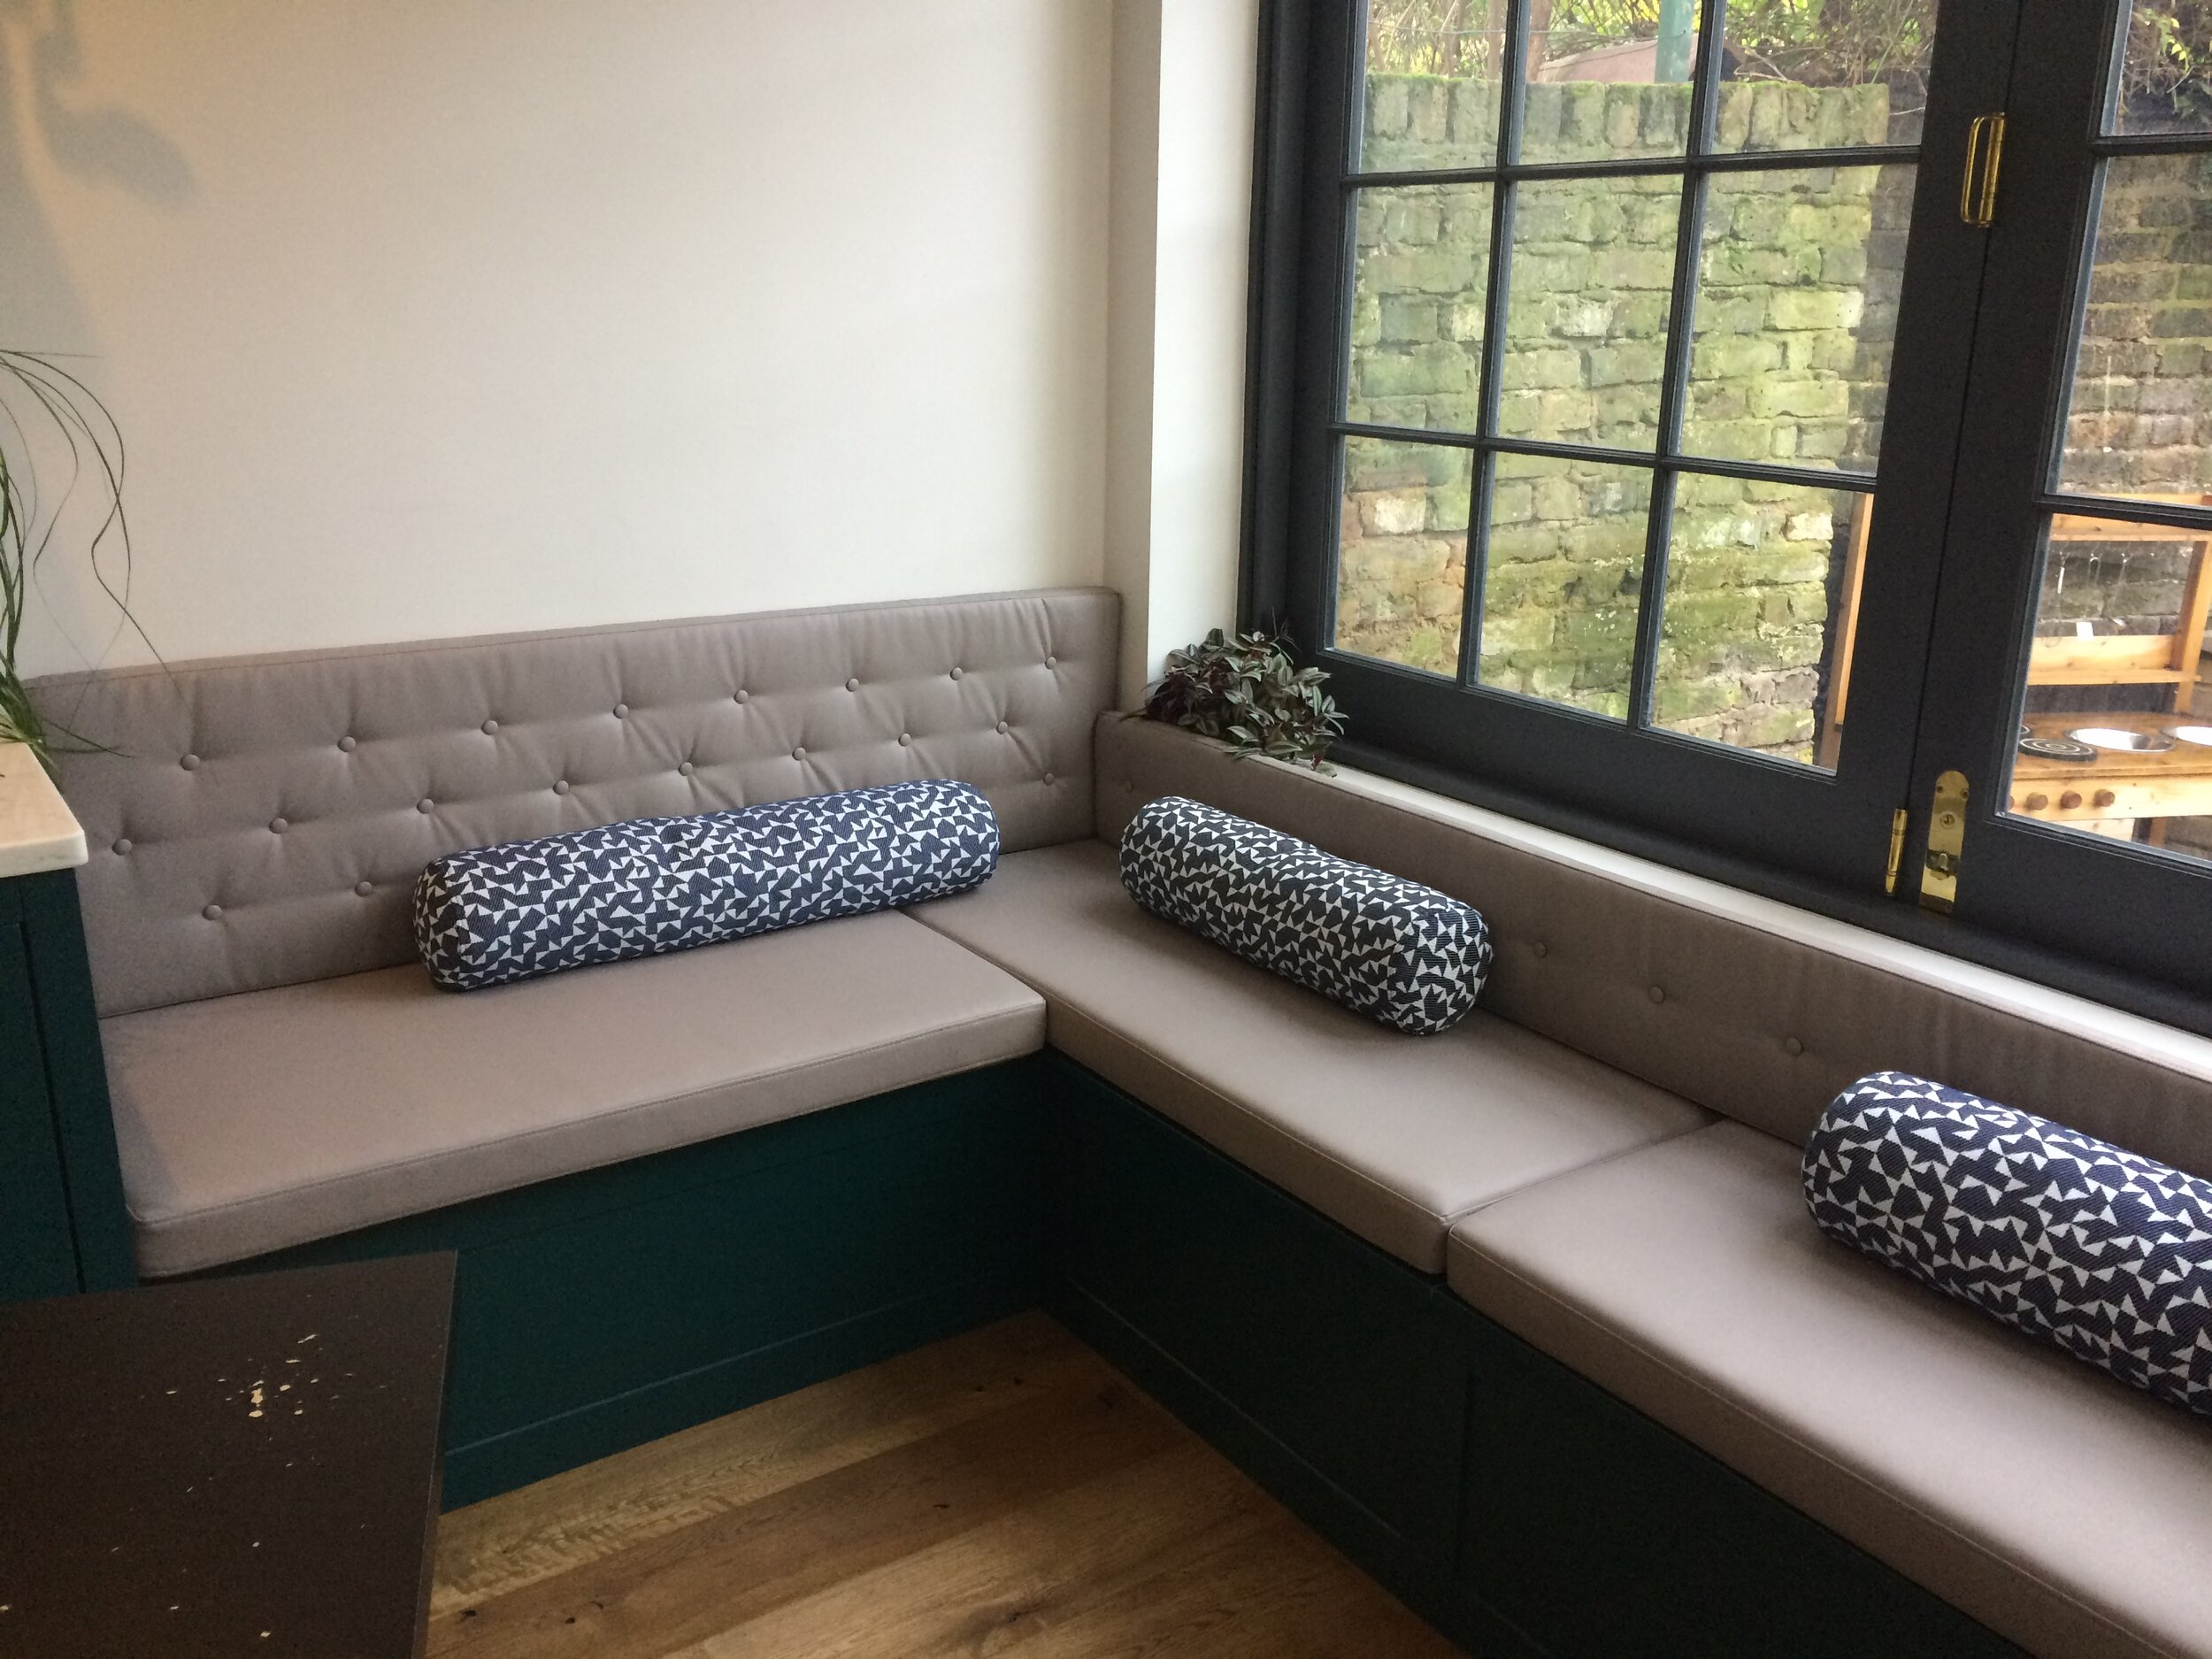 Bespoke seat and bolster cushions for a residential project